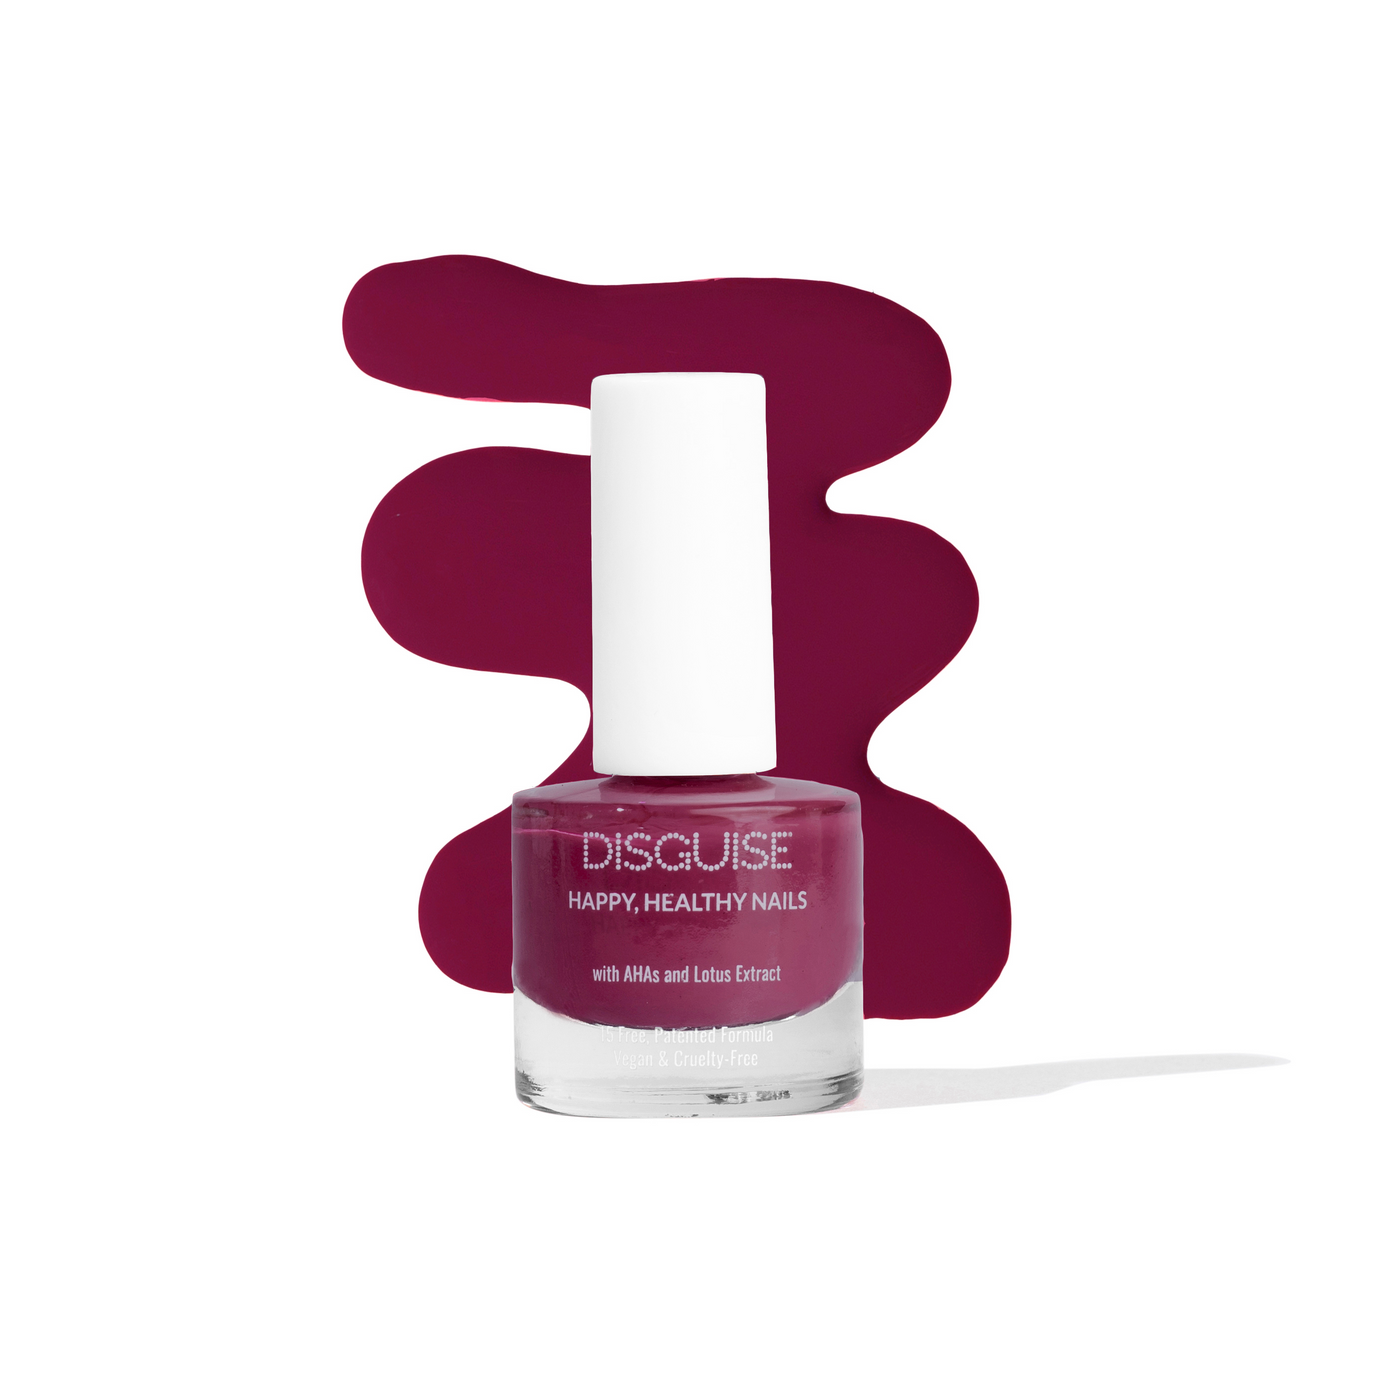 Grape Shake 108, 21 TOXIN FREE | WITH AHA & LOTUS EXTRACT | INTENSE COLOR | 9 ml